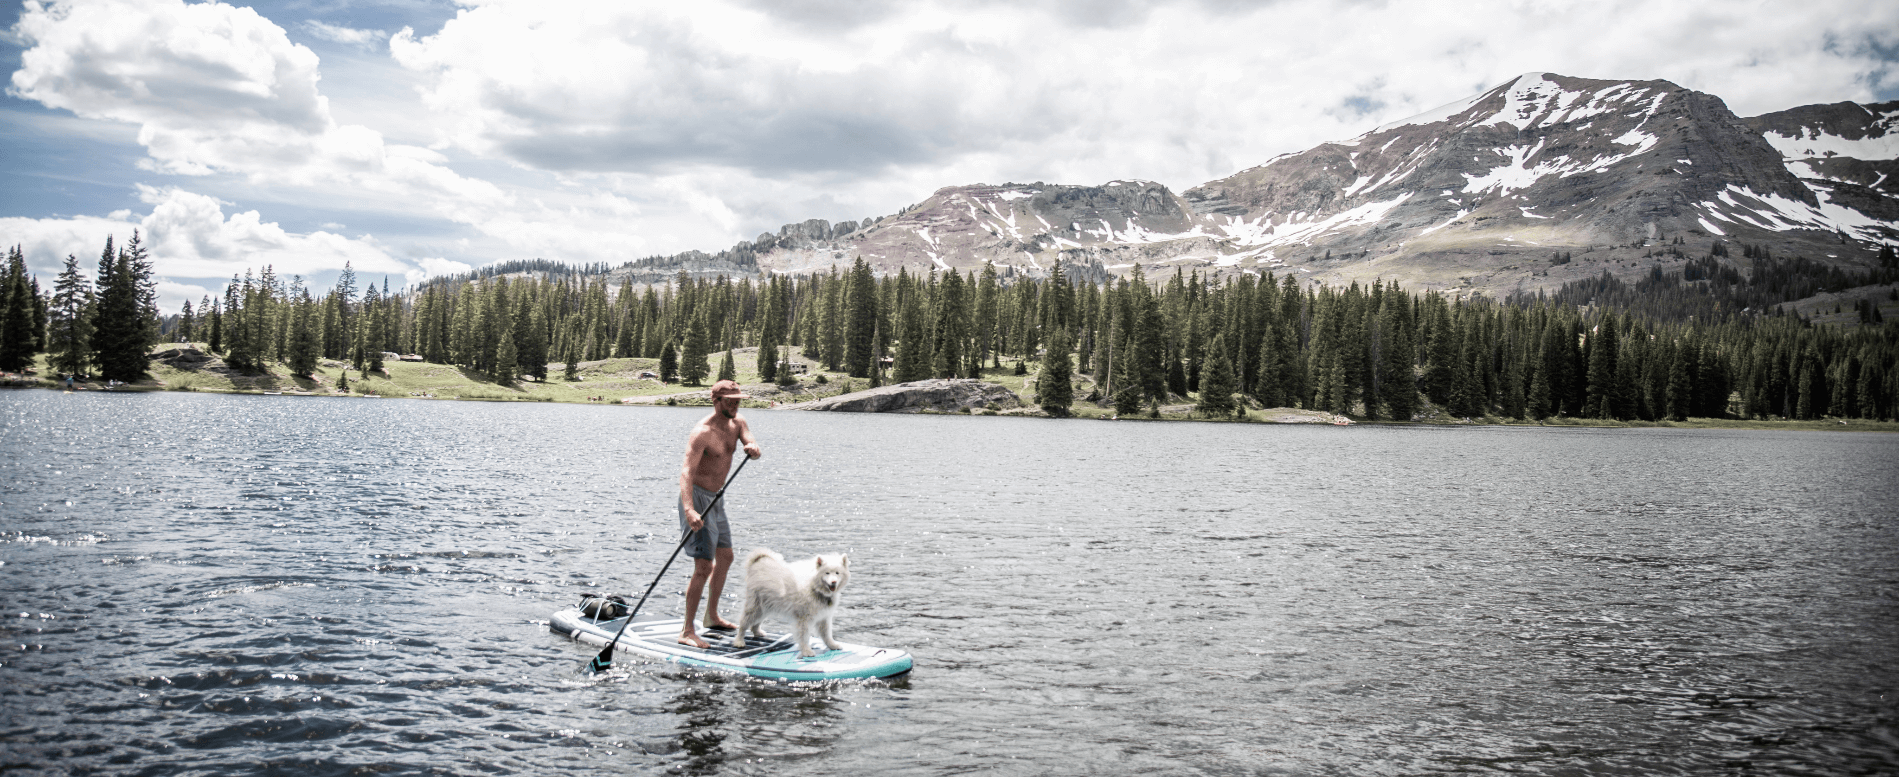 How to Paddle Board with Your Dog